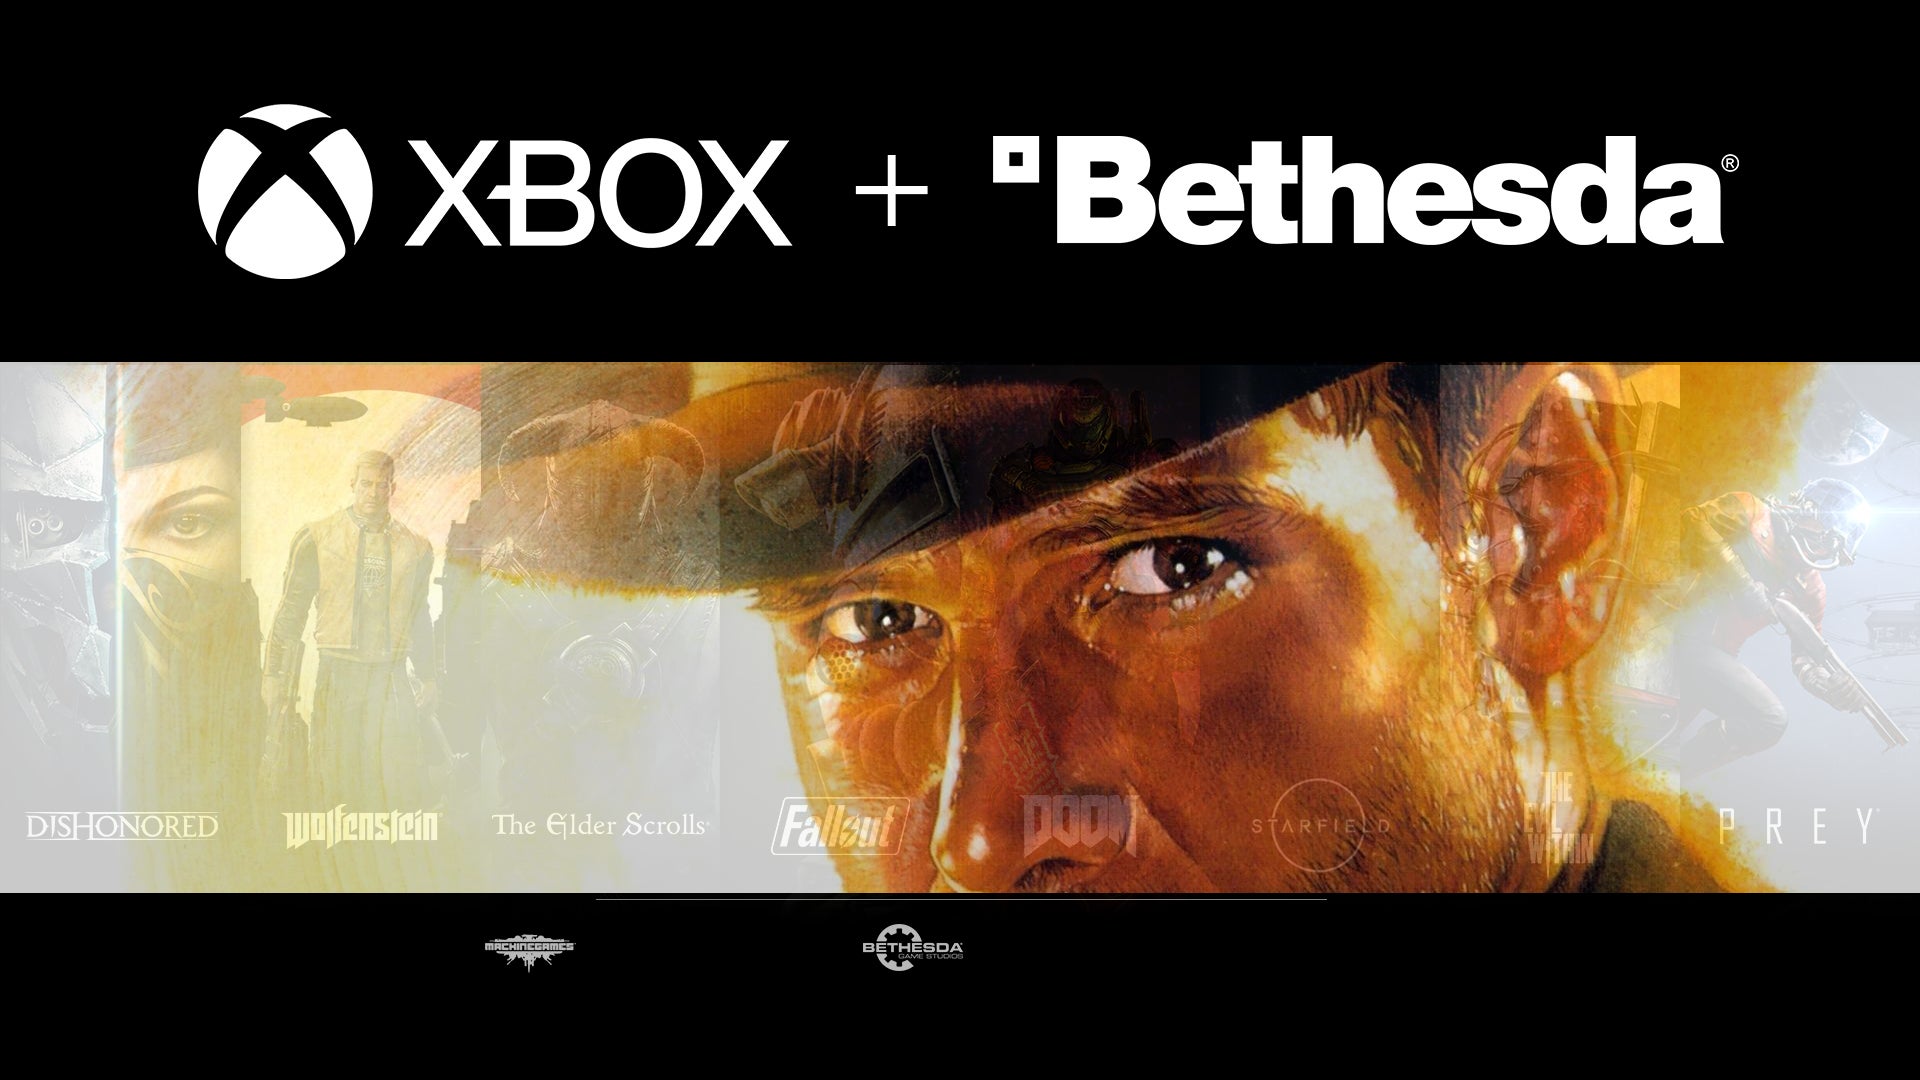 Image for Report claims Indiana Jones Bethesda game isn't an Xbox exclusive, opening gate to PS5